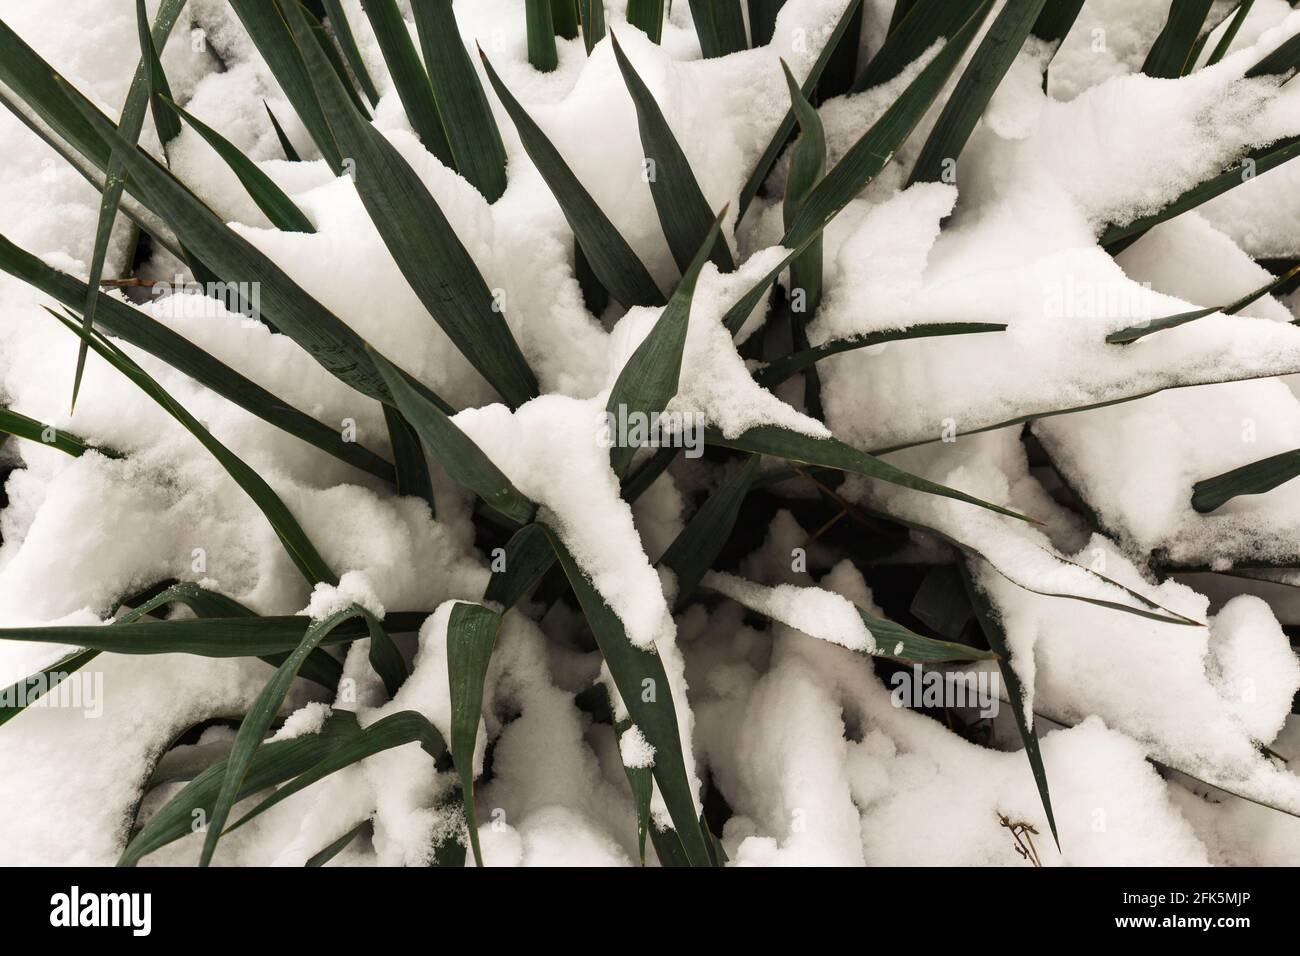 Yucca filamentosa, evergreen shrub and flowering plant covered with snow in the garden Stock Photo